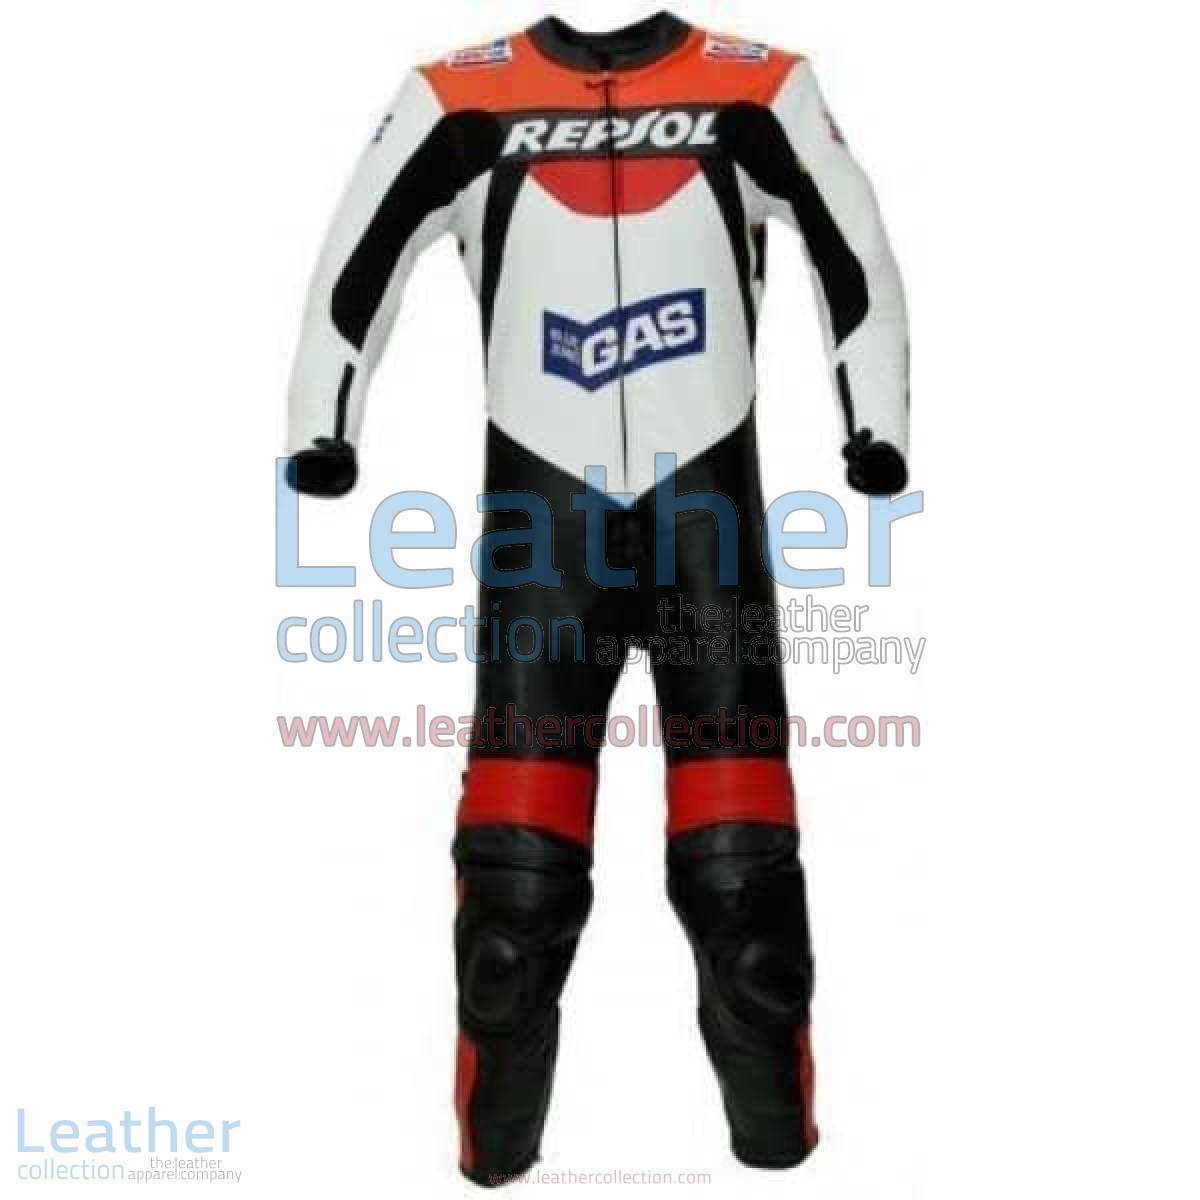 Repsol Gas Racing Leather Suit | leather suit